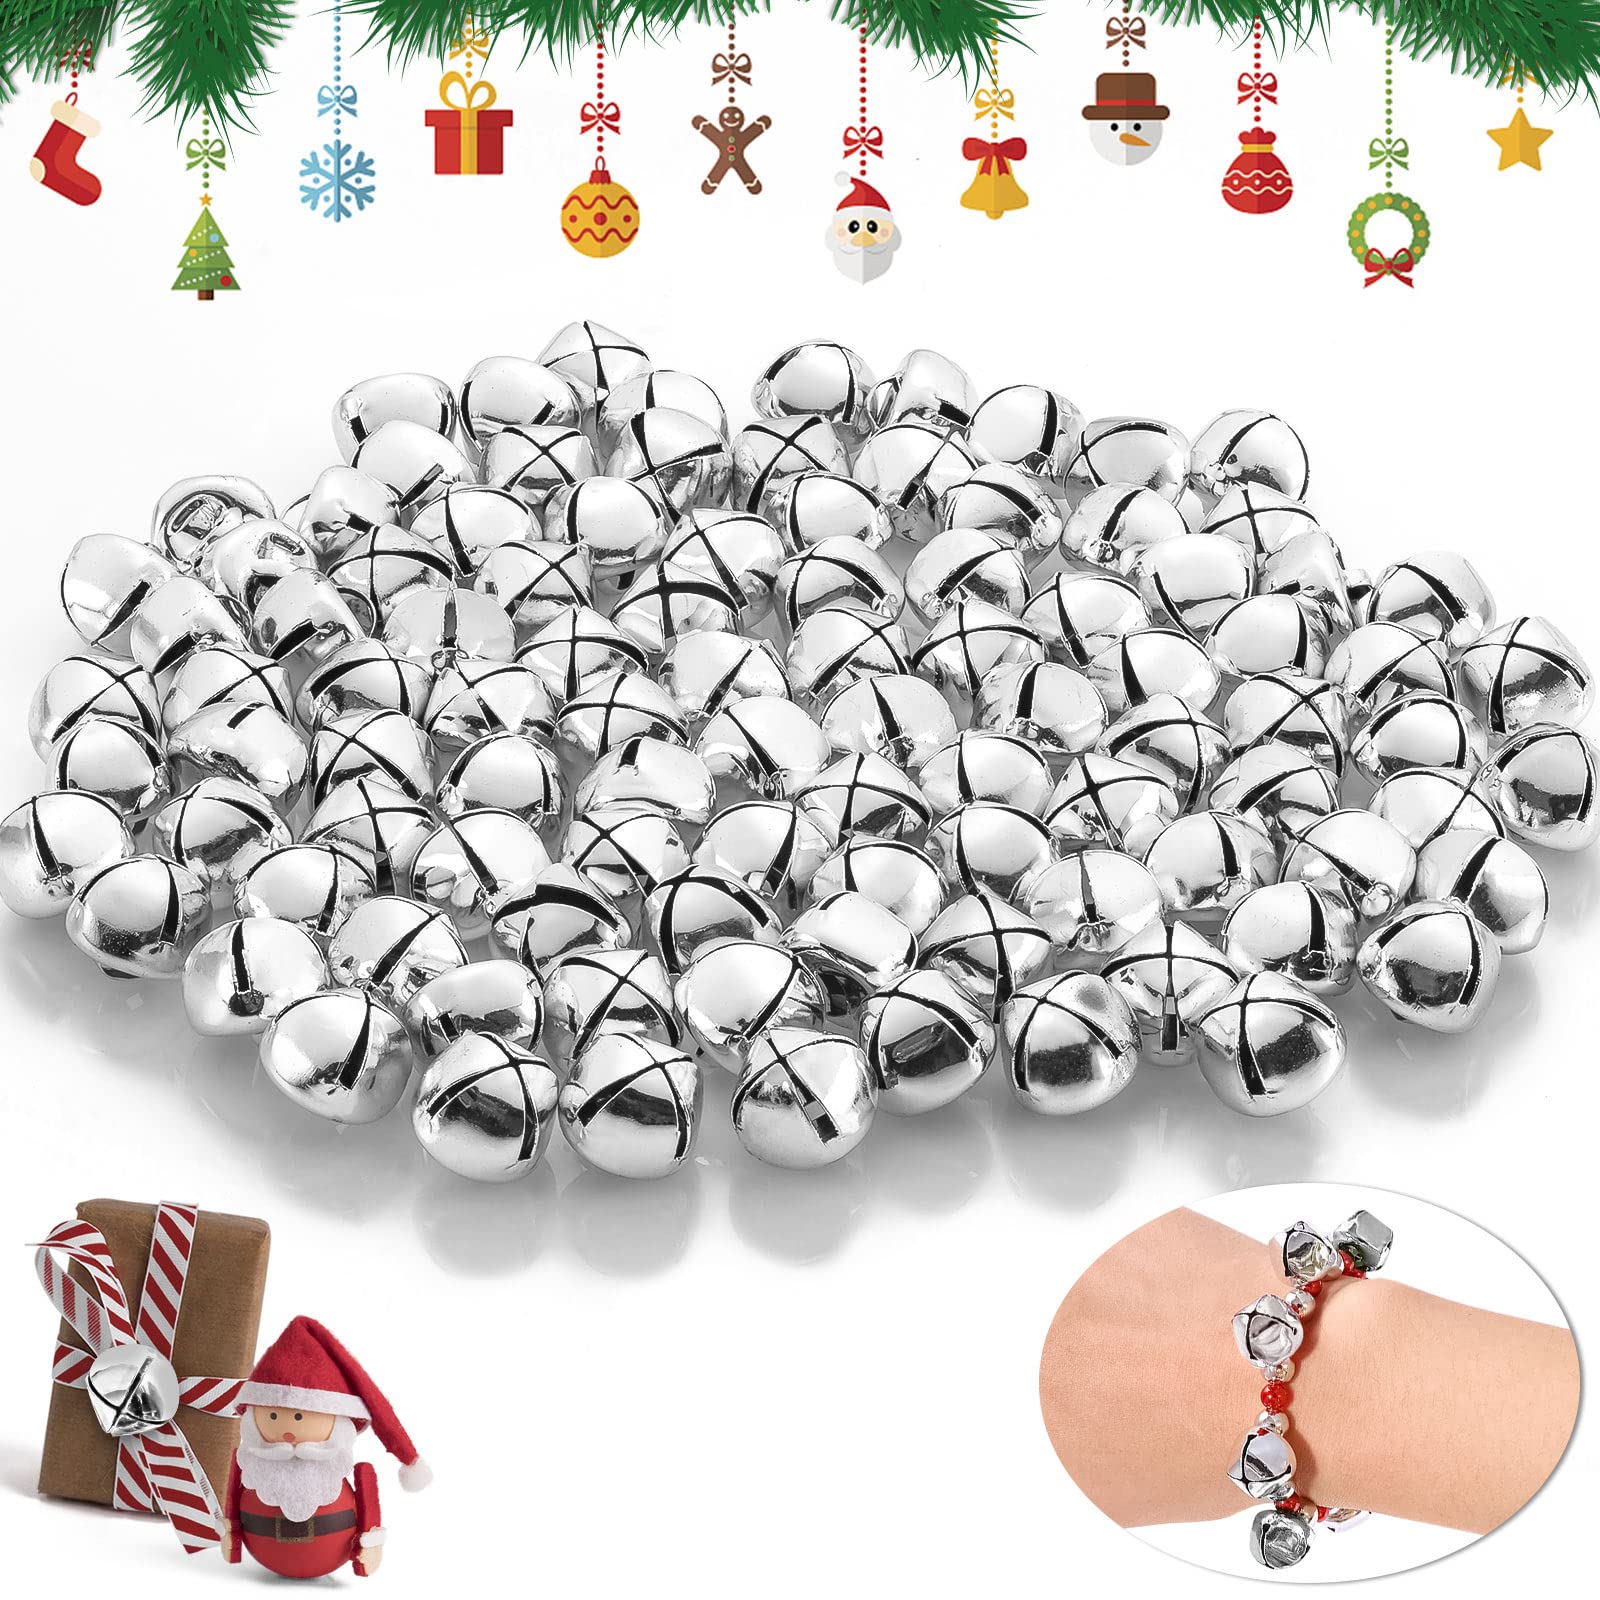 1cm 2cm 10/100pcs Small Bells for Crafts Mini Jingle Bells Gold Silver Pet  Hanging Metal Bell Wedding Christmas Decoration Accessories -  Norway